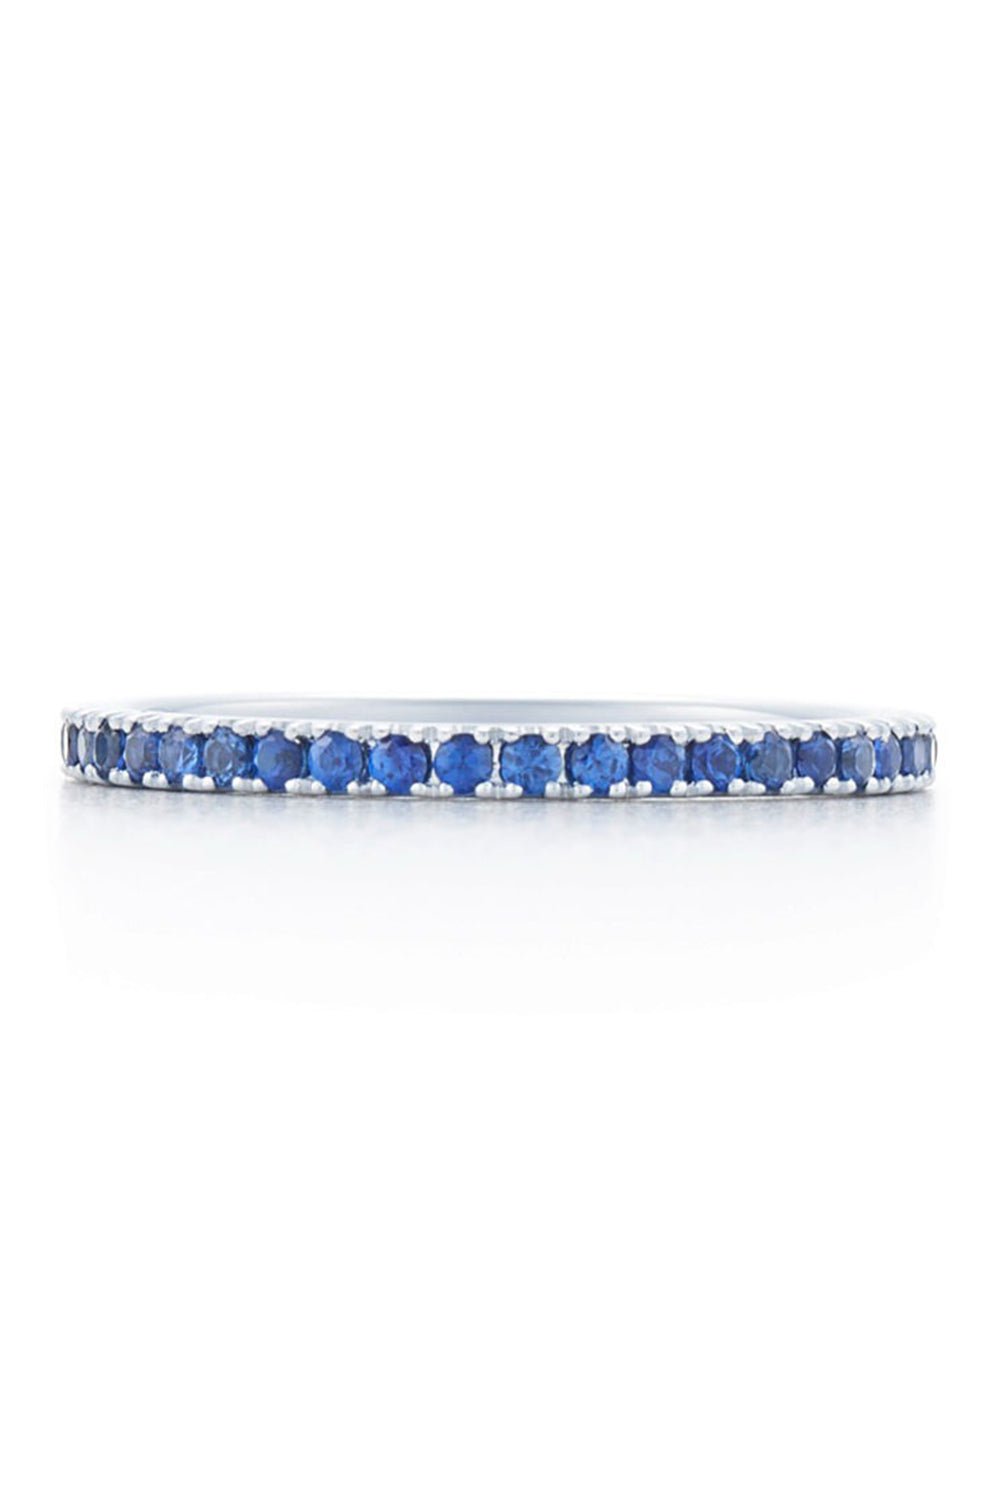 KWIAT-Stackable Slim Sapphire Ring-WHITE GOLD